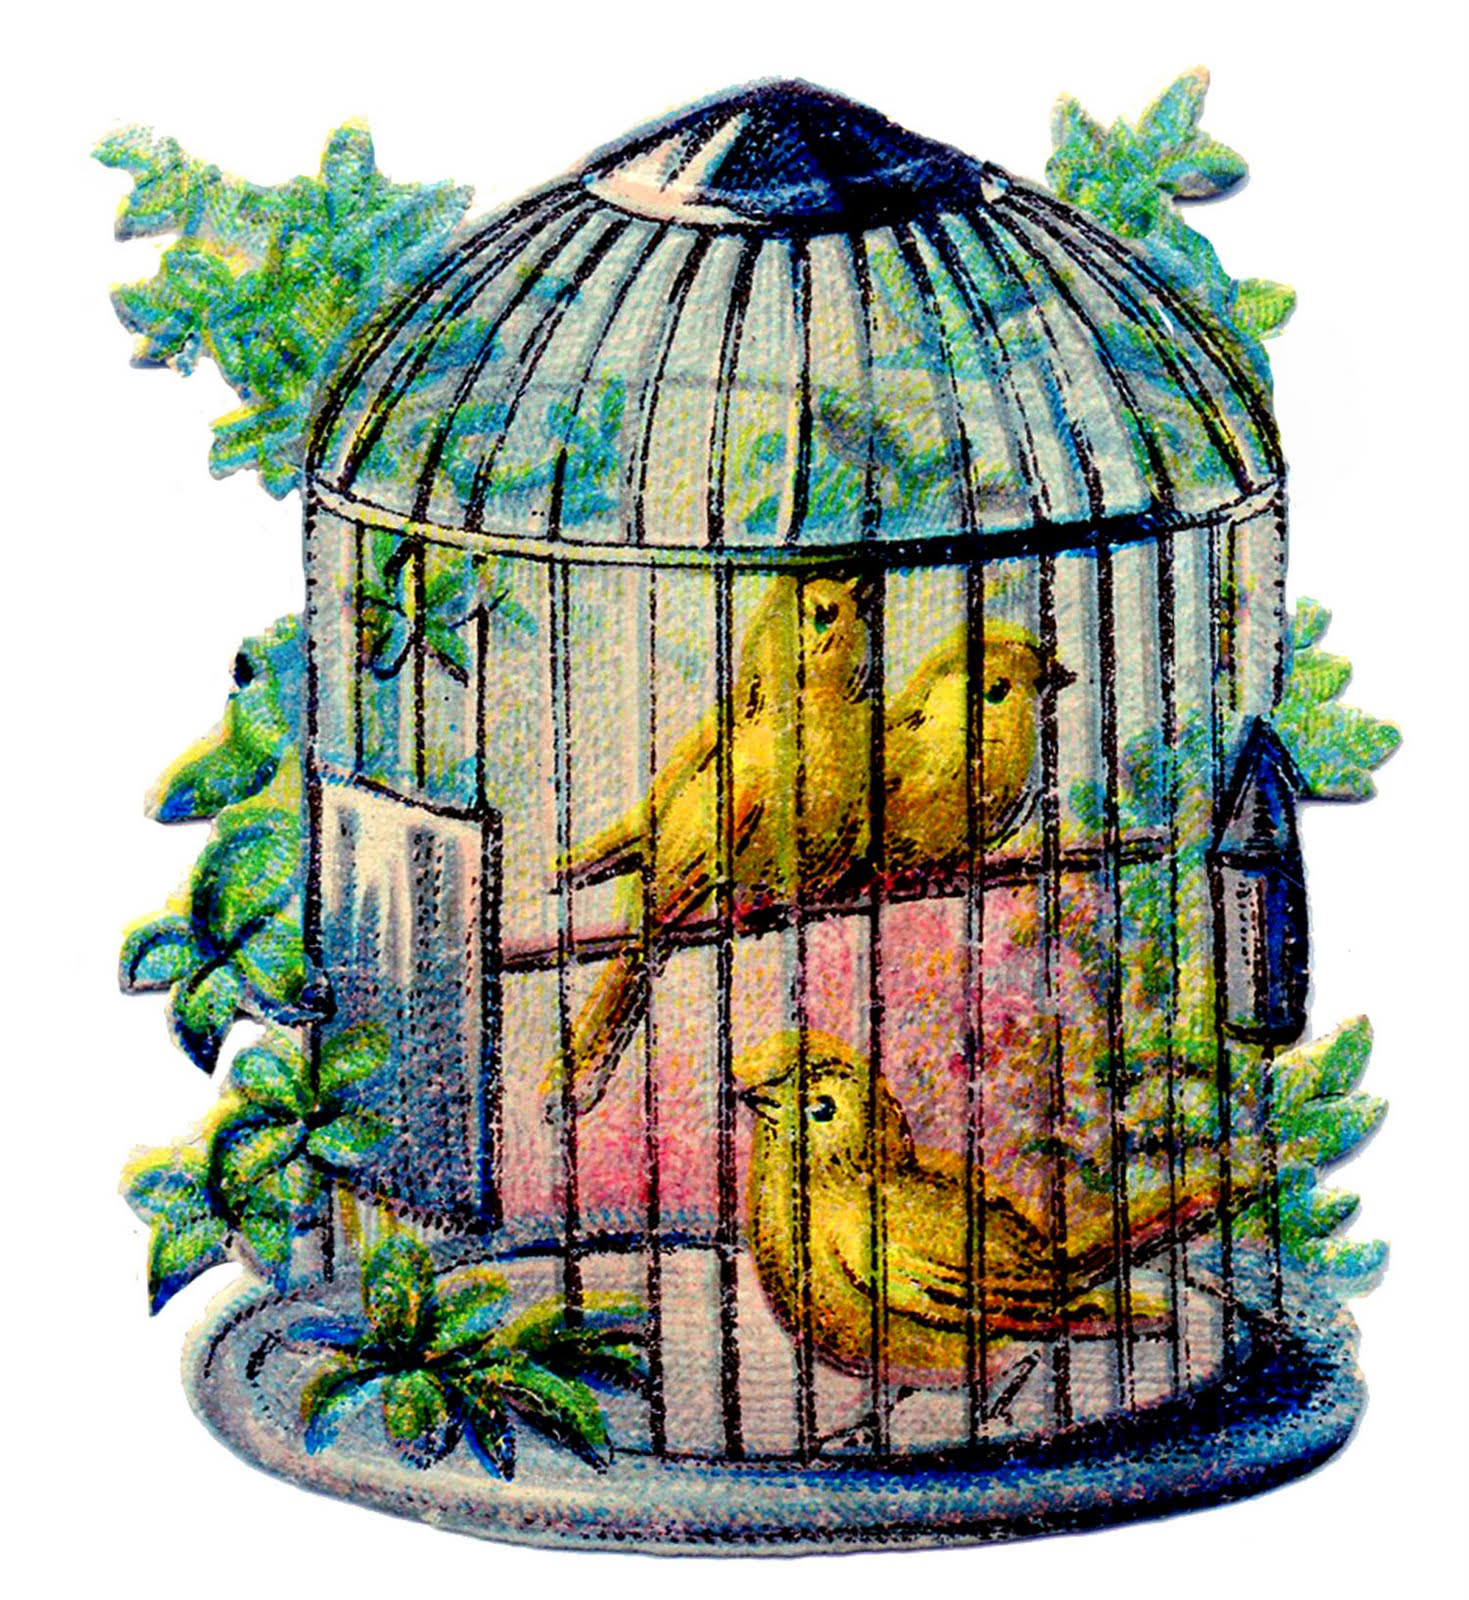 Canaries in cage image